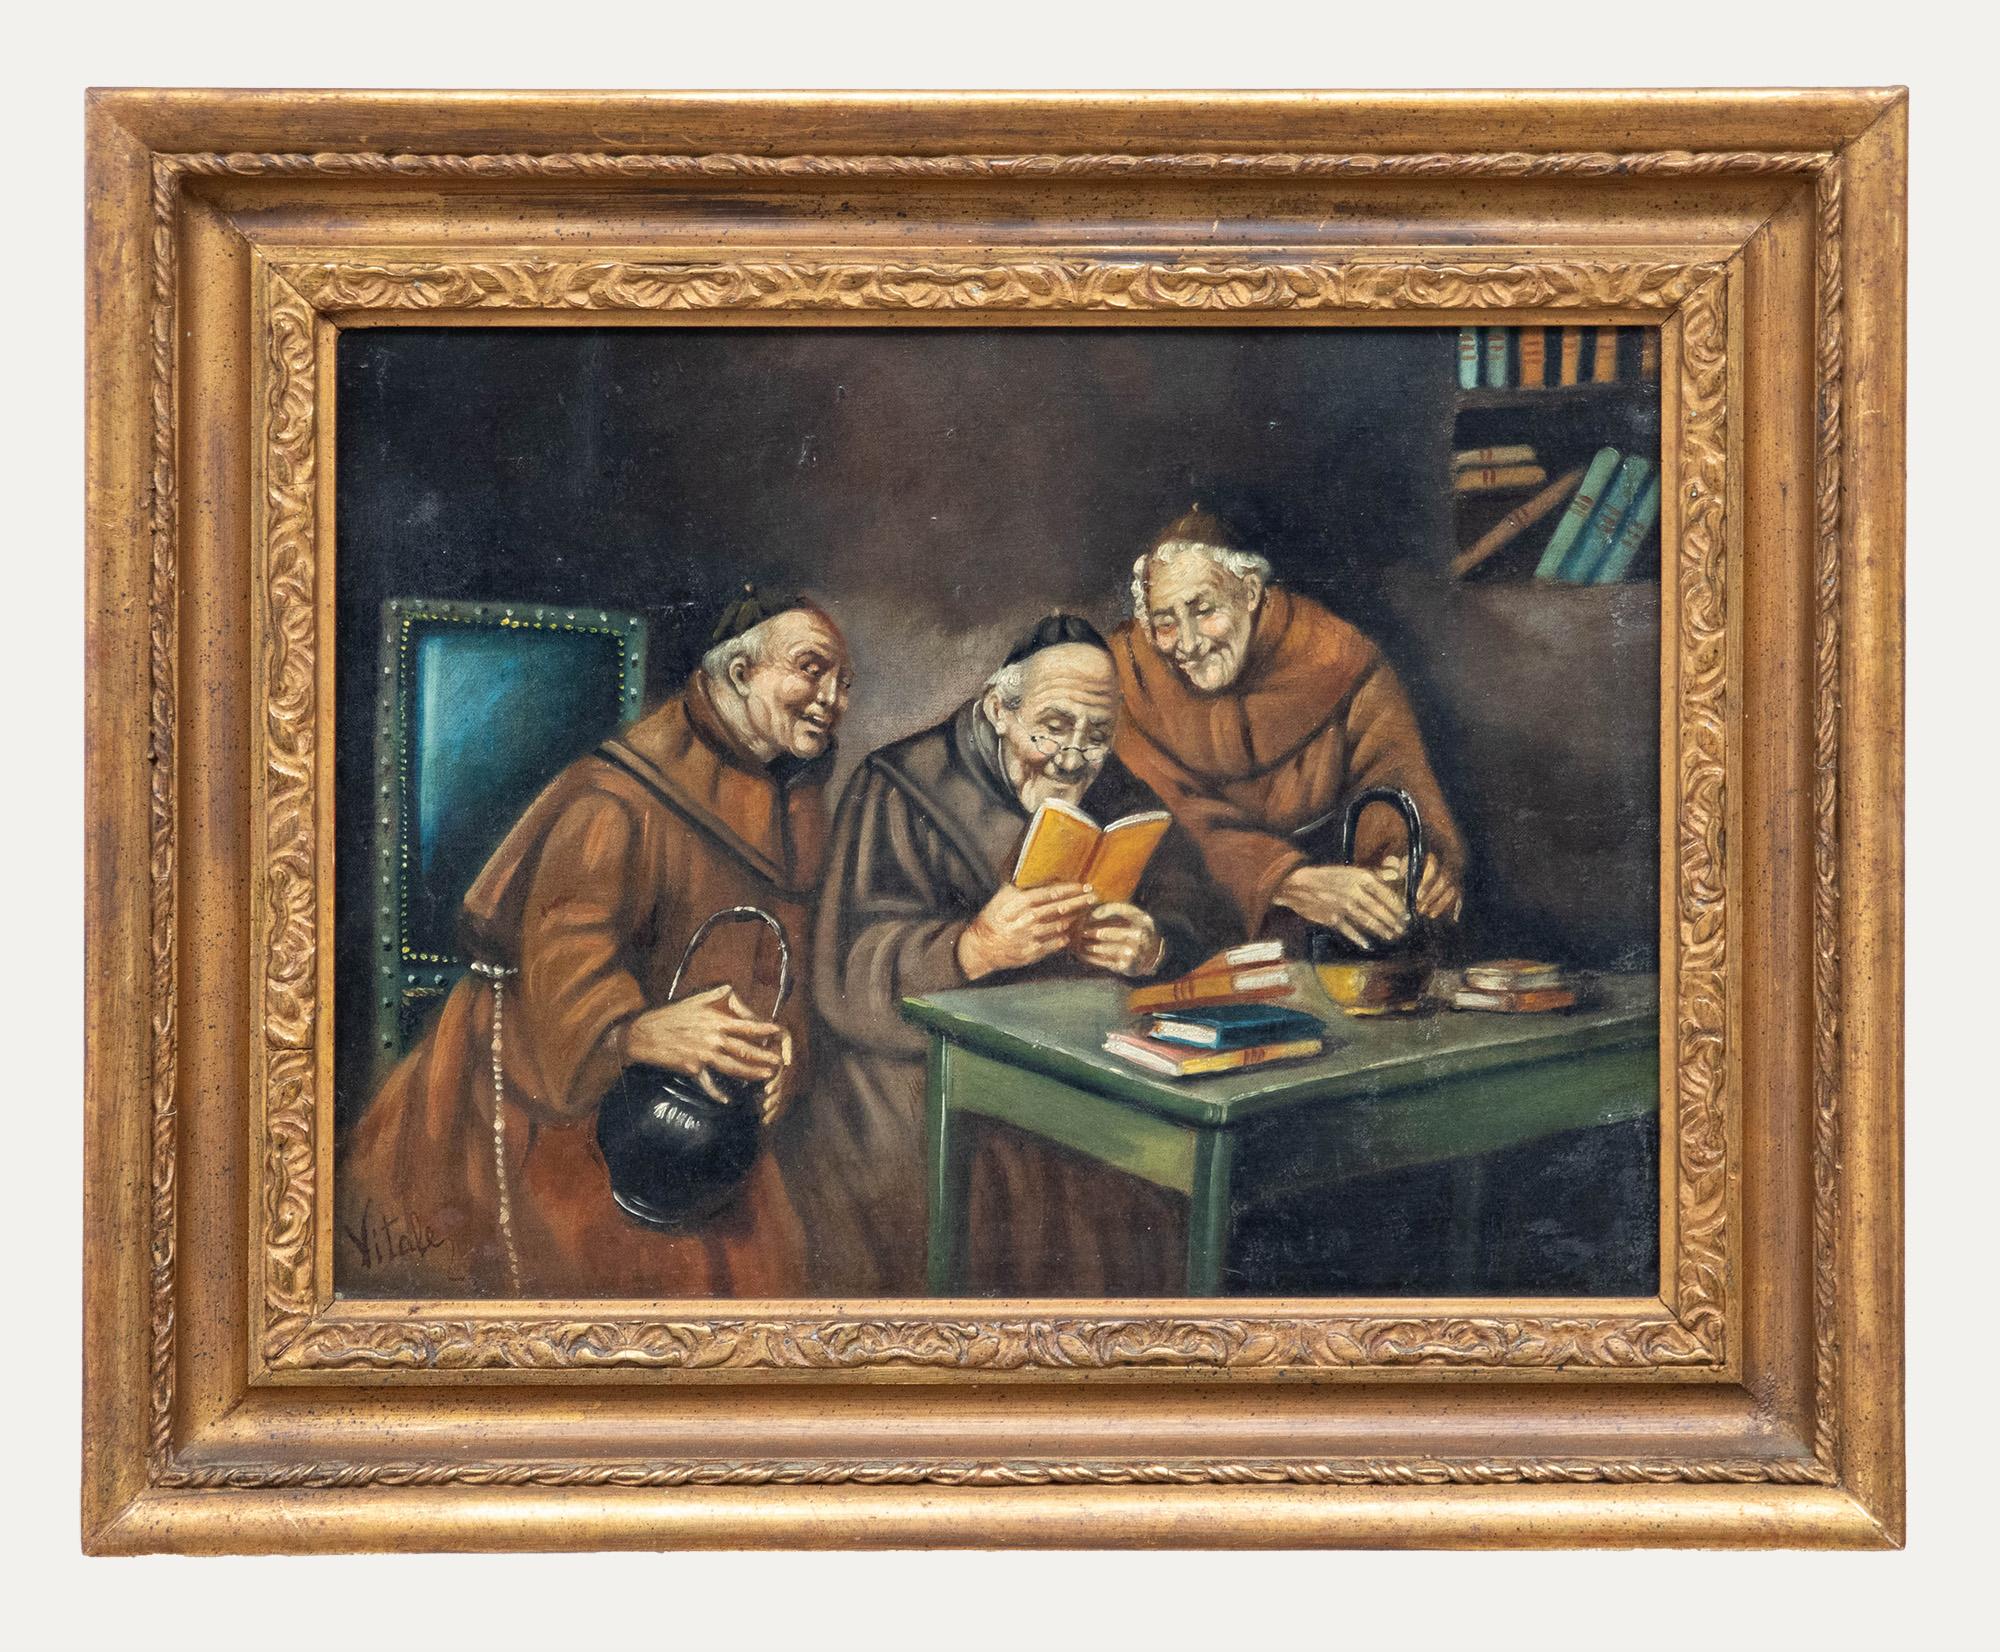 Unknown Figurative Painting - Ferruccio Vitale (1875-1933) - Framed Early 20th Century Oil, Monks Reading